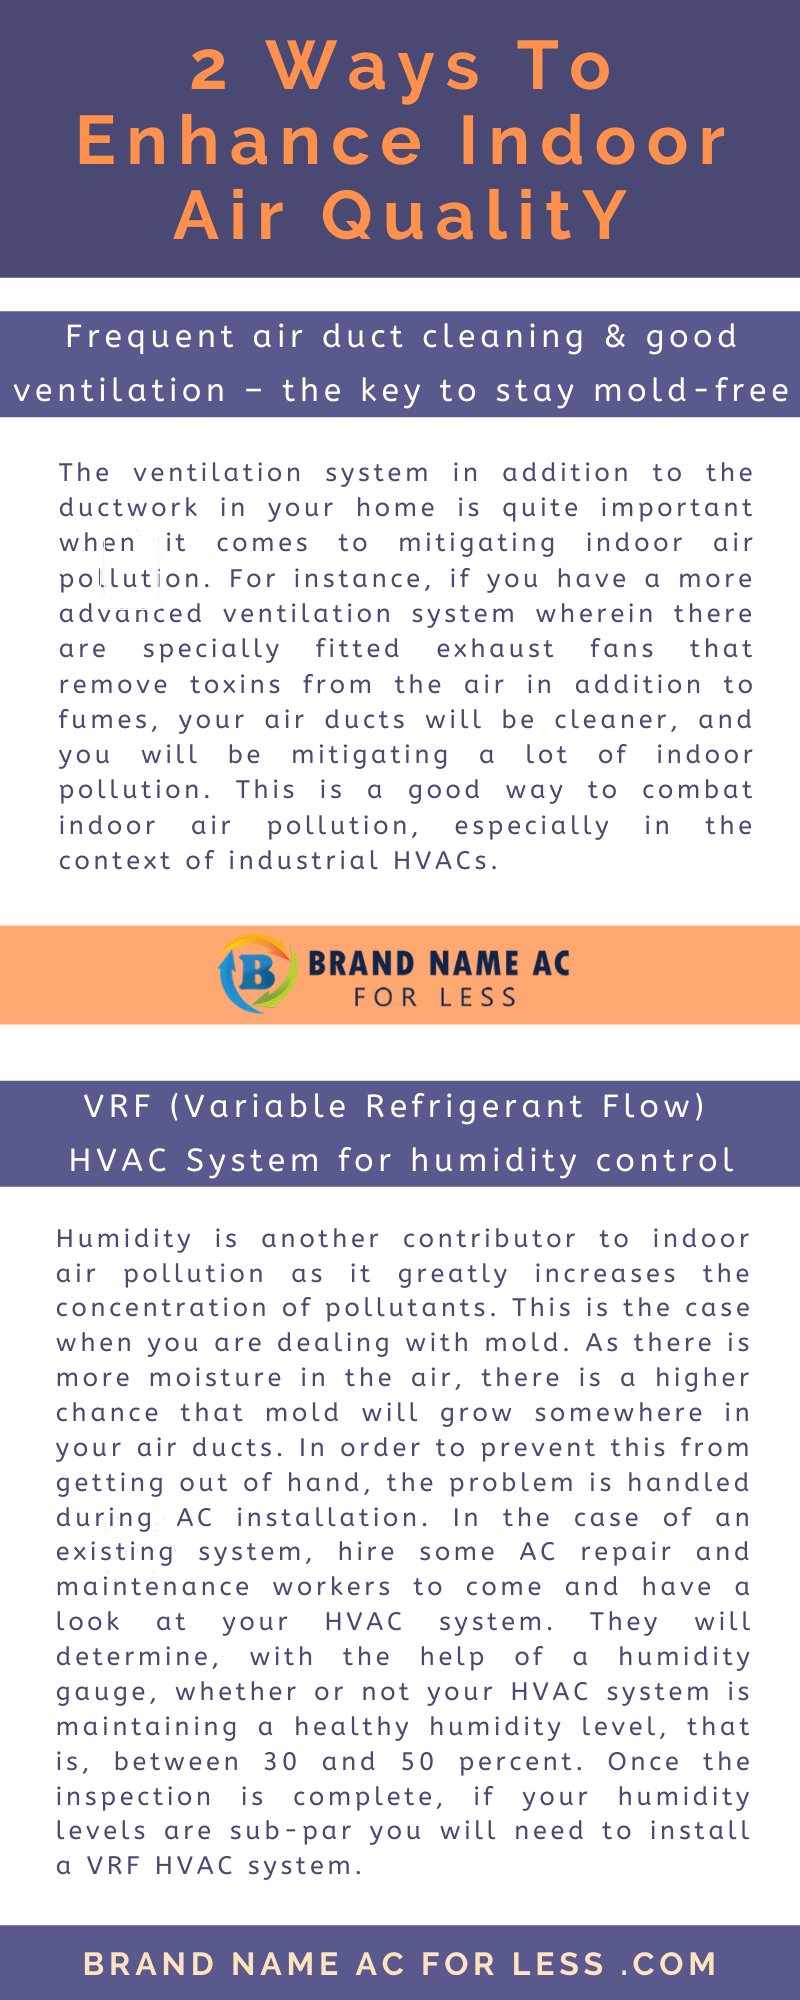 2 Ways to Enhance Indoor Air Quality